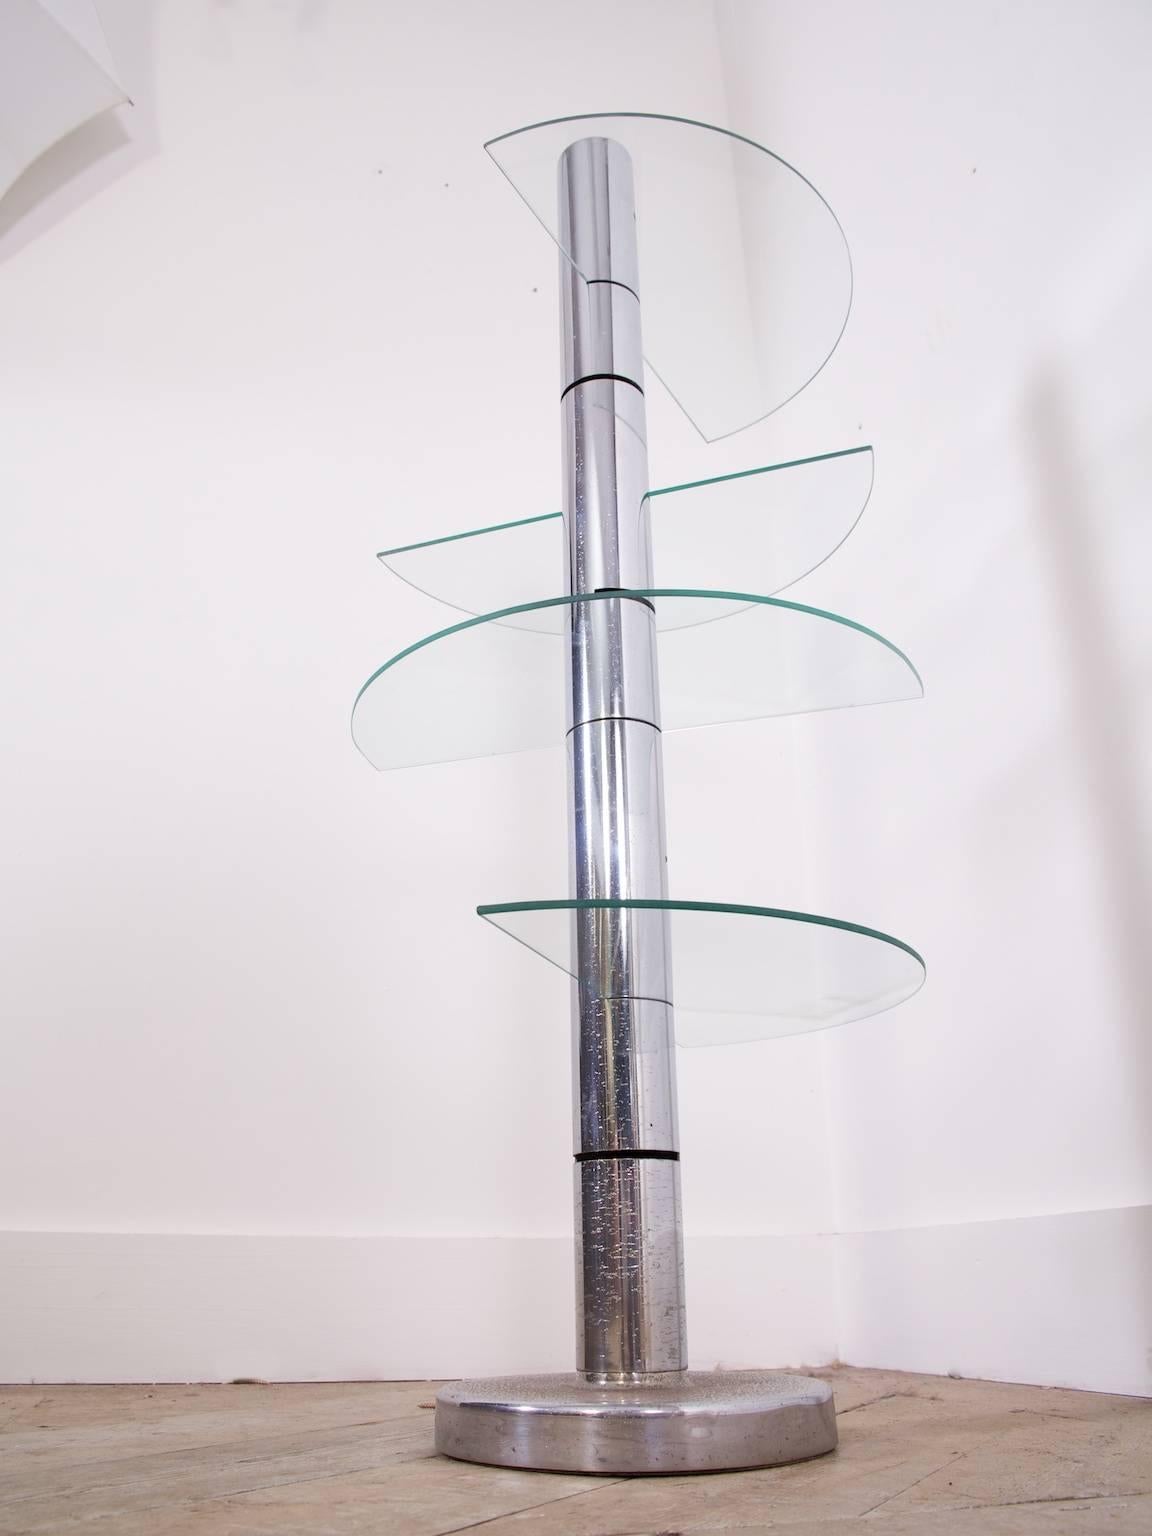 A chrome and glass pillar retail display stand by Multiform London.

Mid-Century.